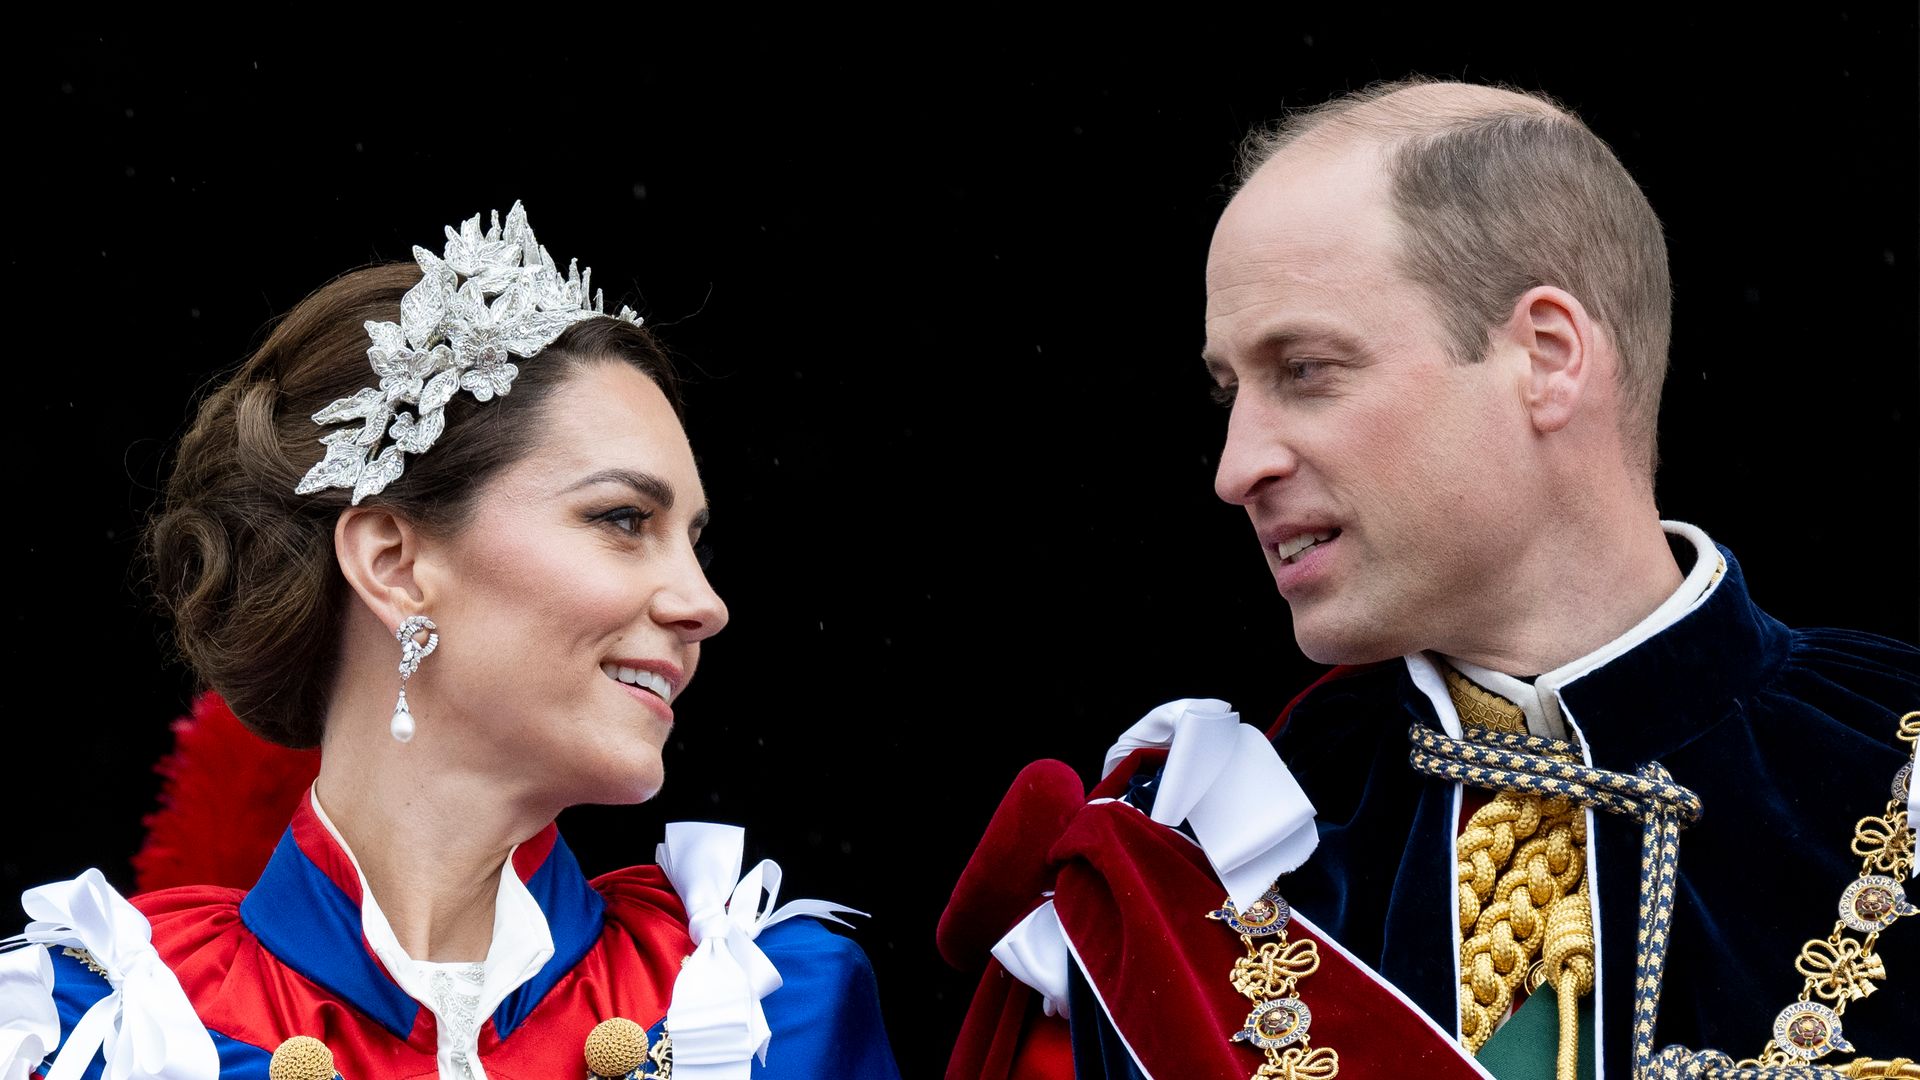 William and Kate looking at each other on palace balcony at the coronation